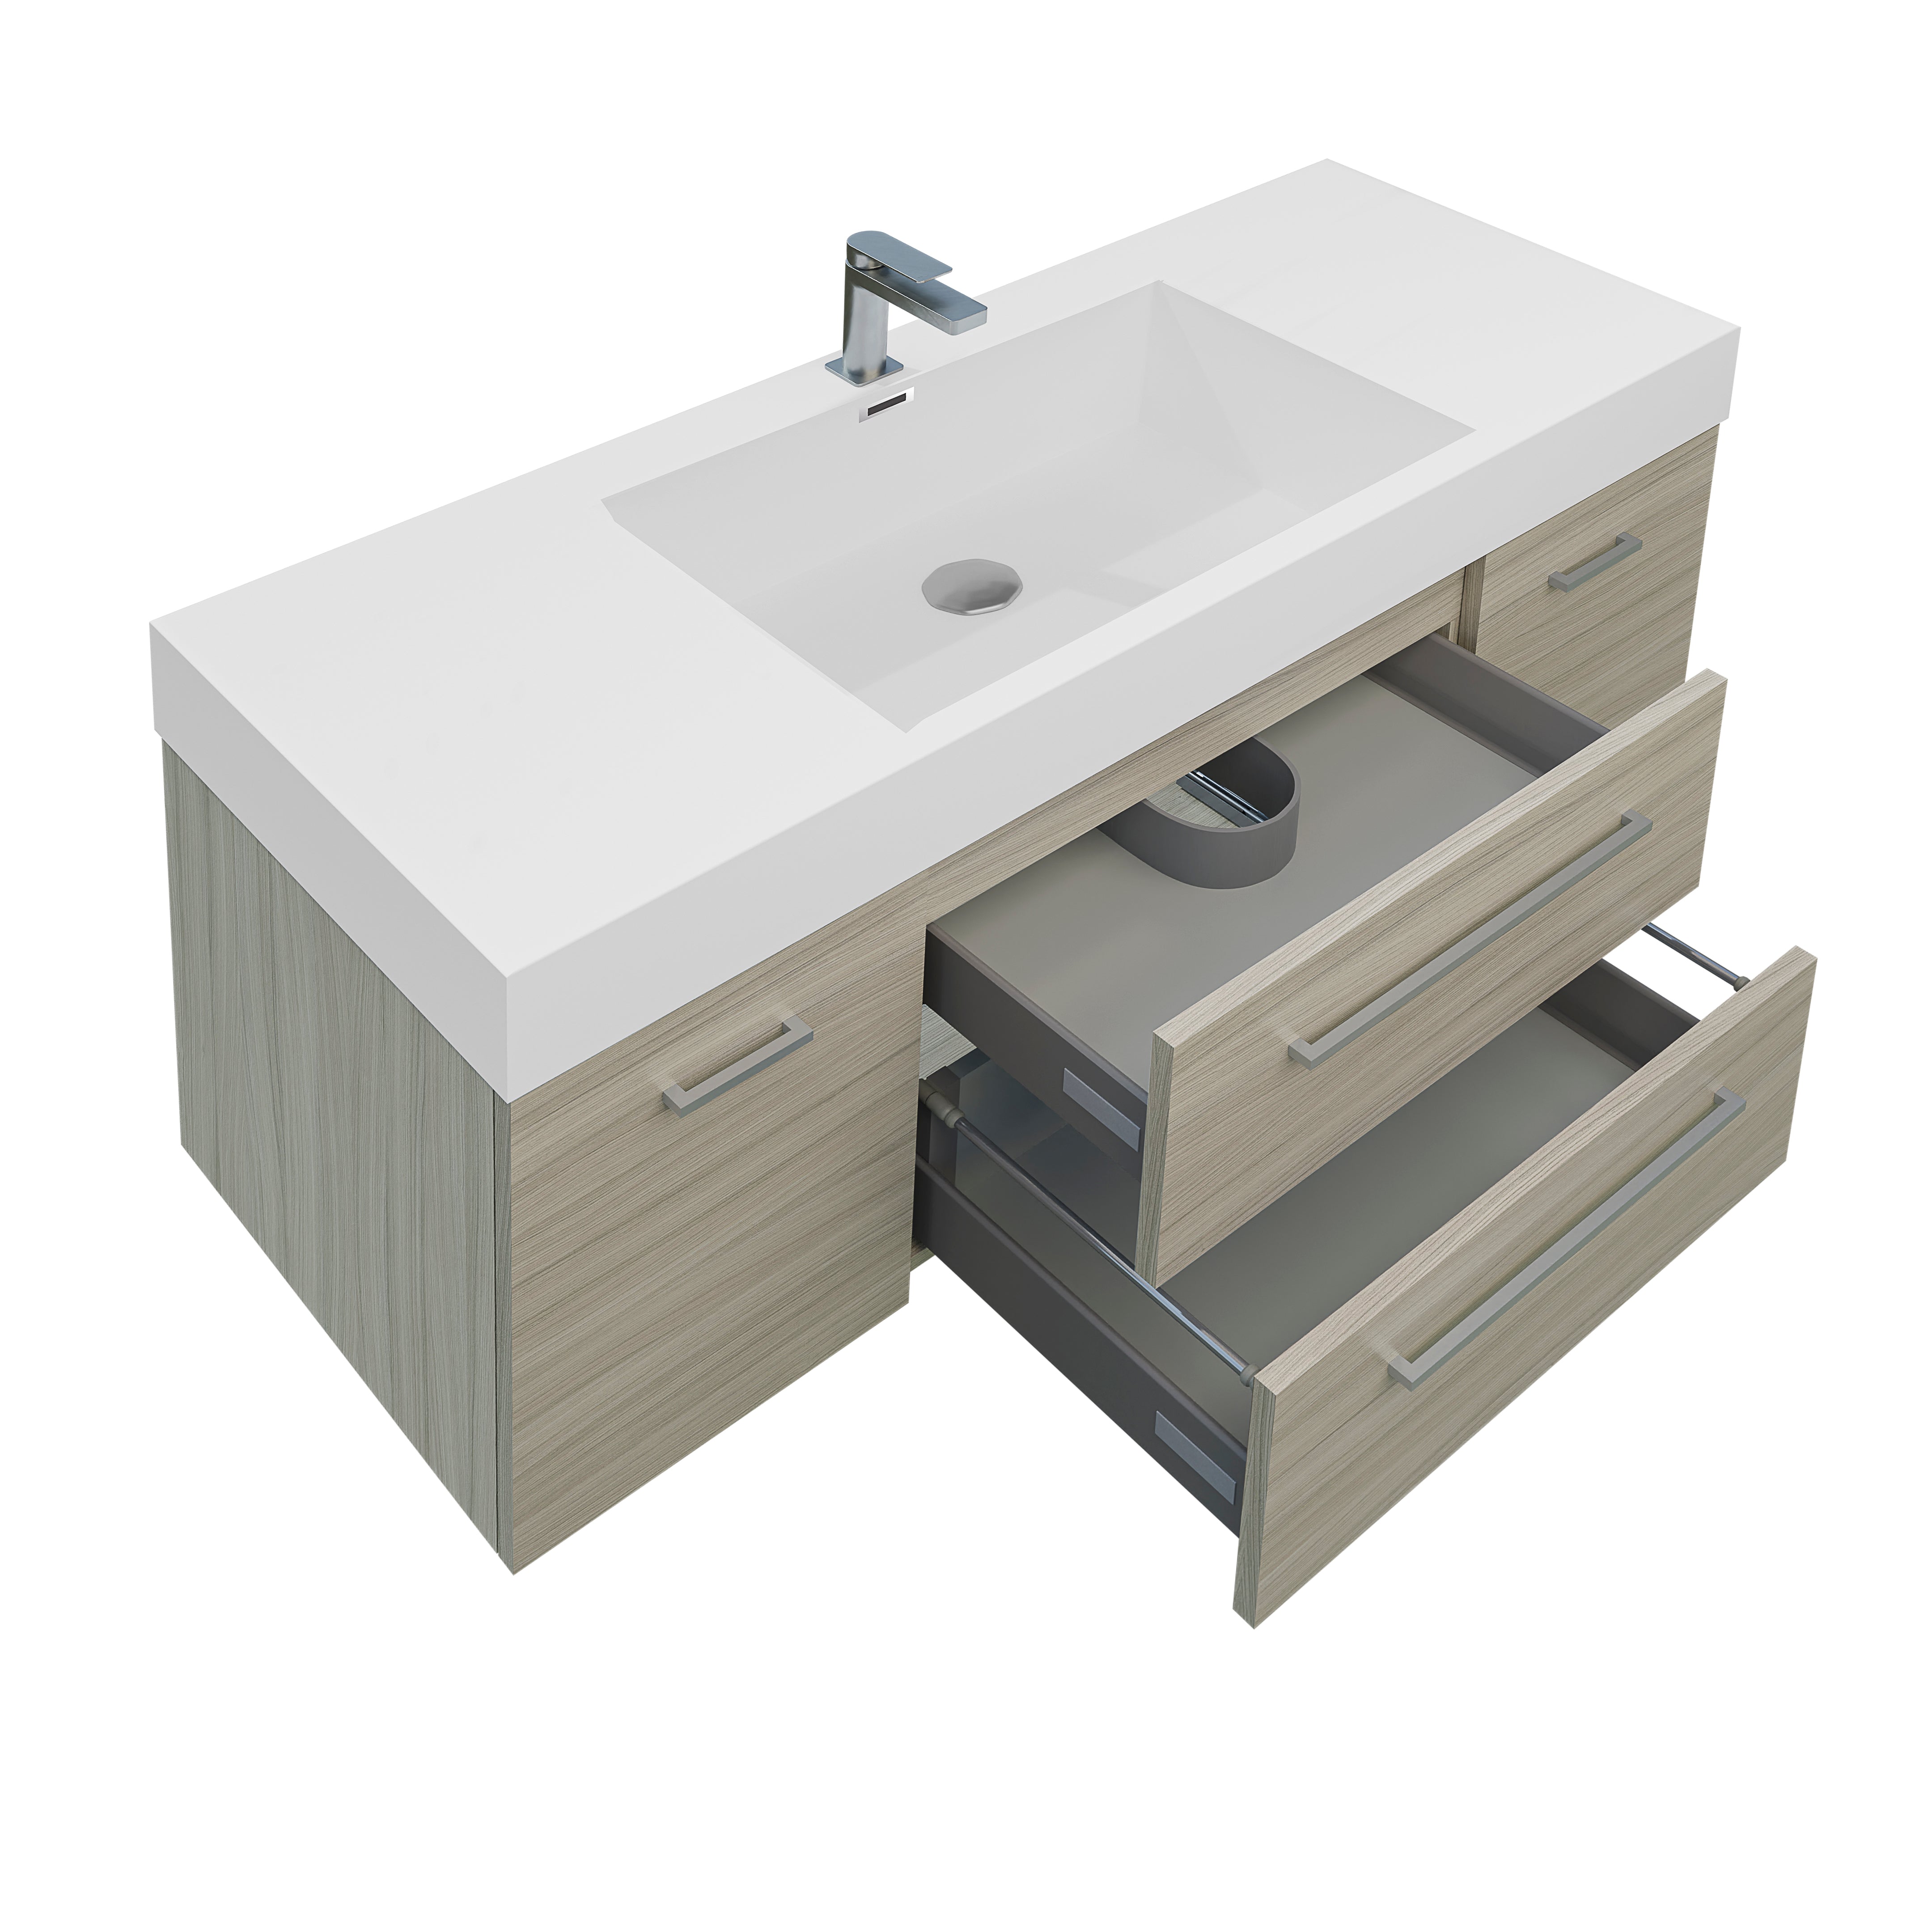 Maya Duo 59 Nilo Grey Wood Texture Cabinet, Square Cultured Marble Sink, Wall Mounted Modern Vanity Set